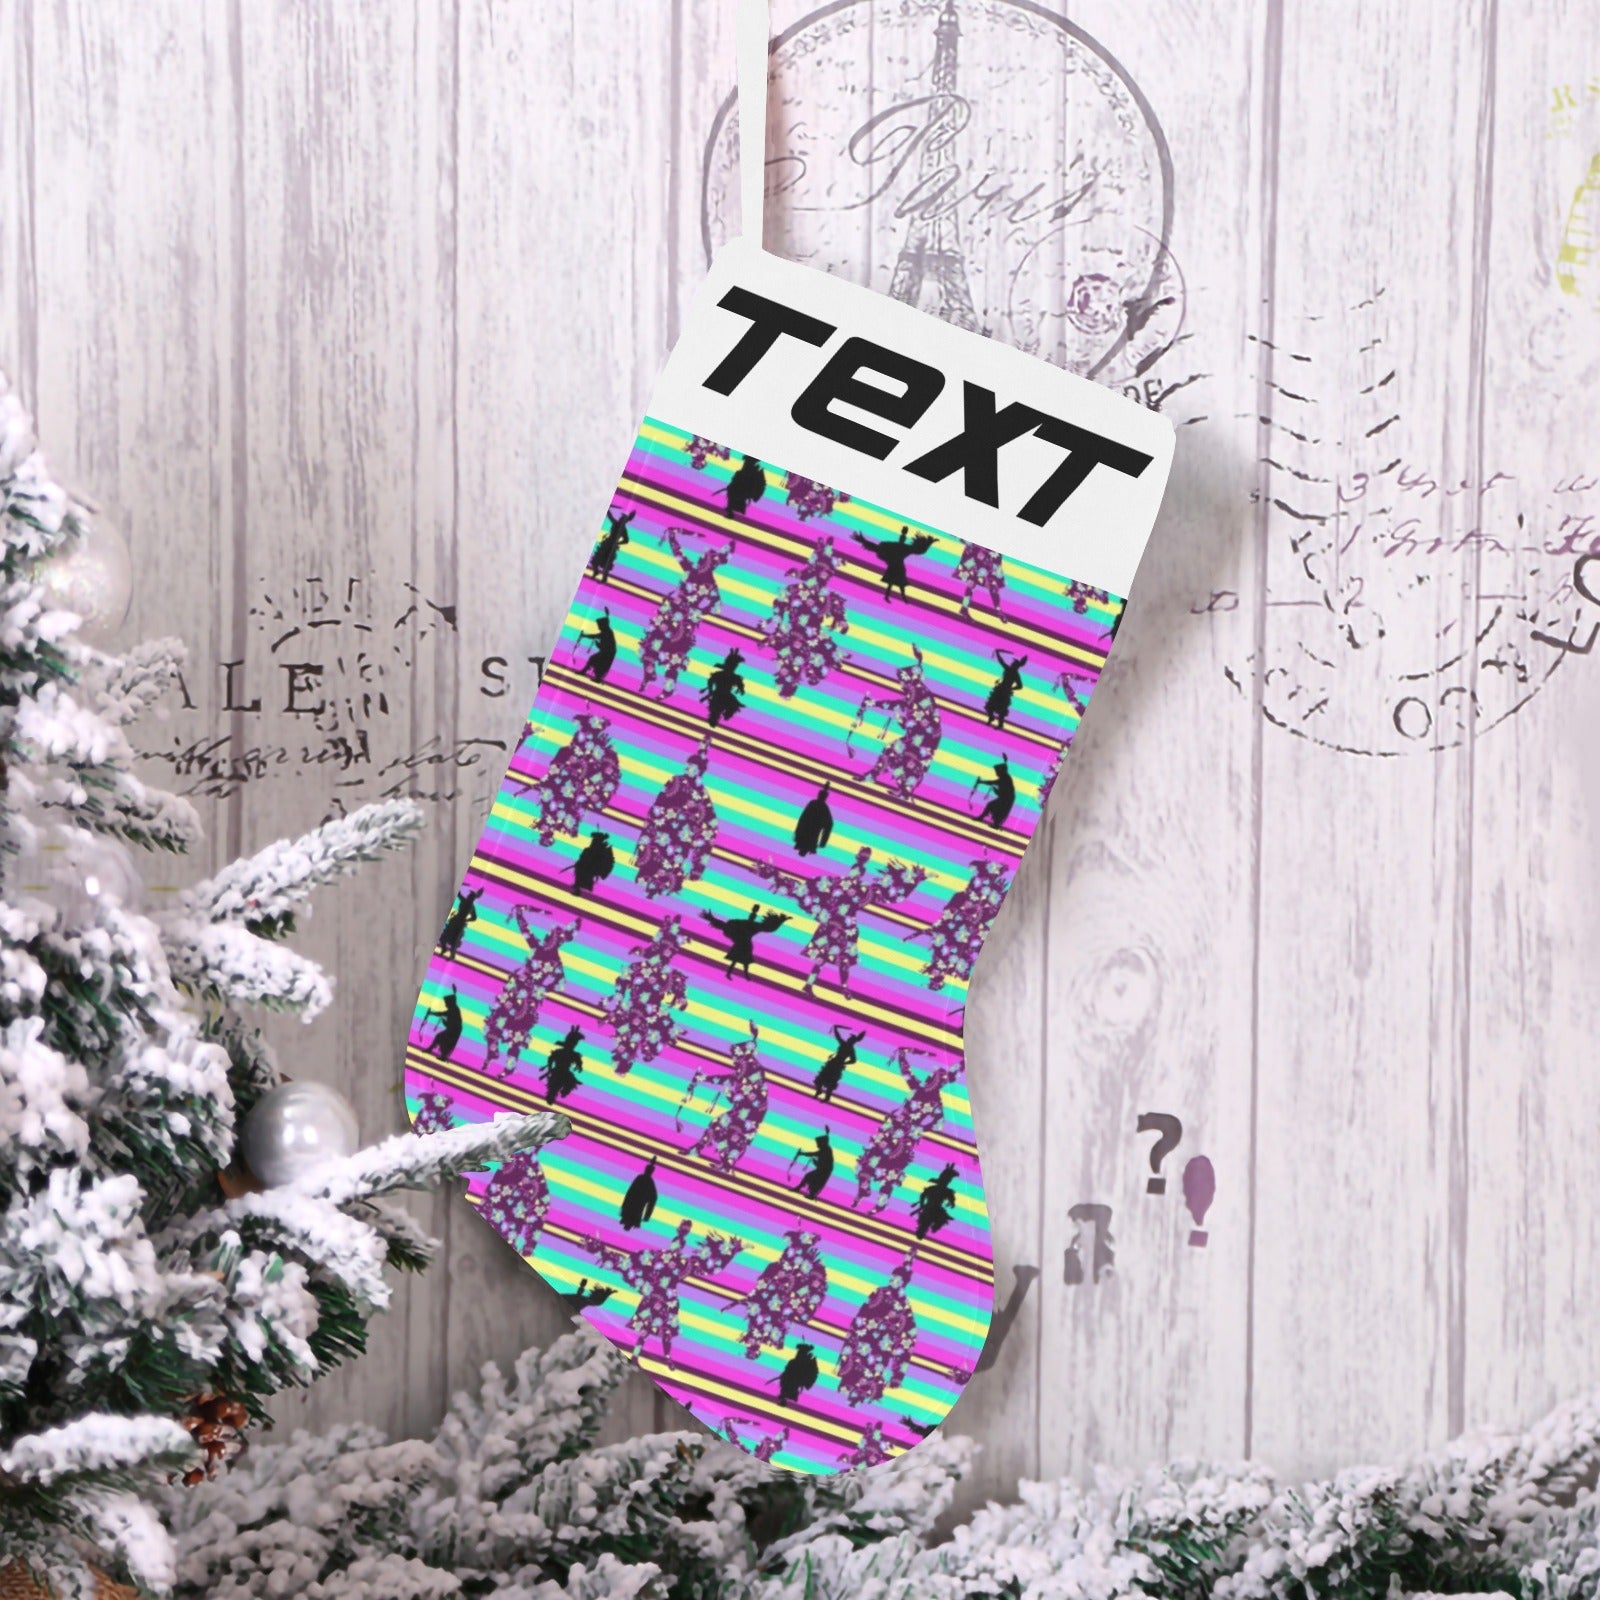 Dancers Floral Contest Christmas Stocking (Custom Text on The Top)